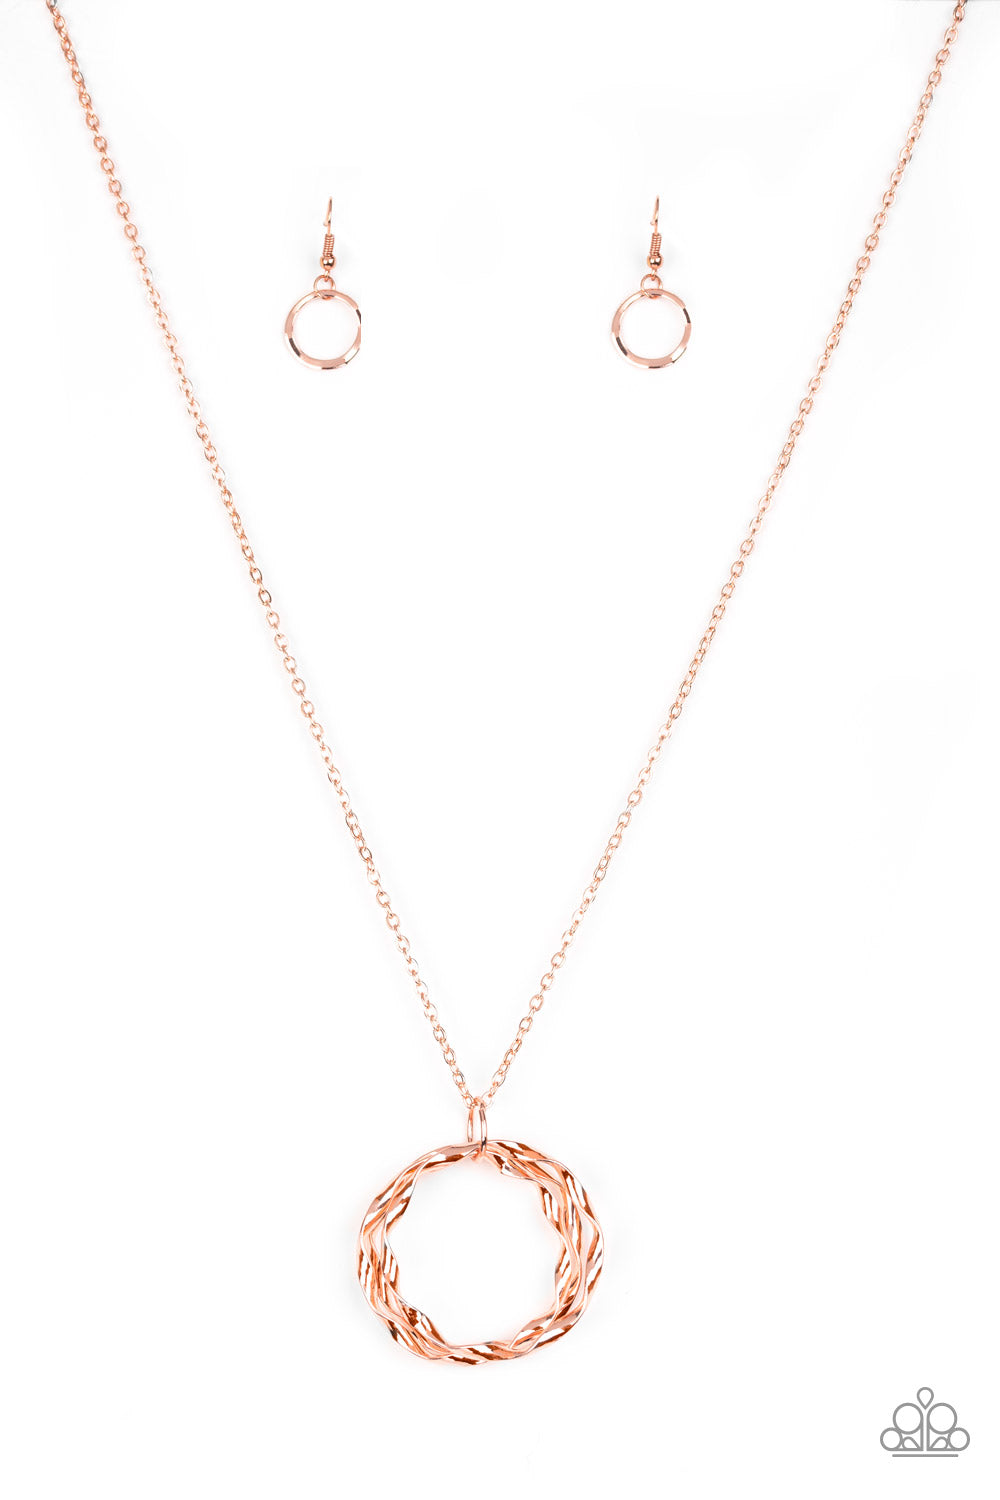 pittmanbling-and-jewelry-inc-presentsmillennial-minimalist-copper-necklace-paparazzi-accessories